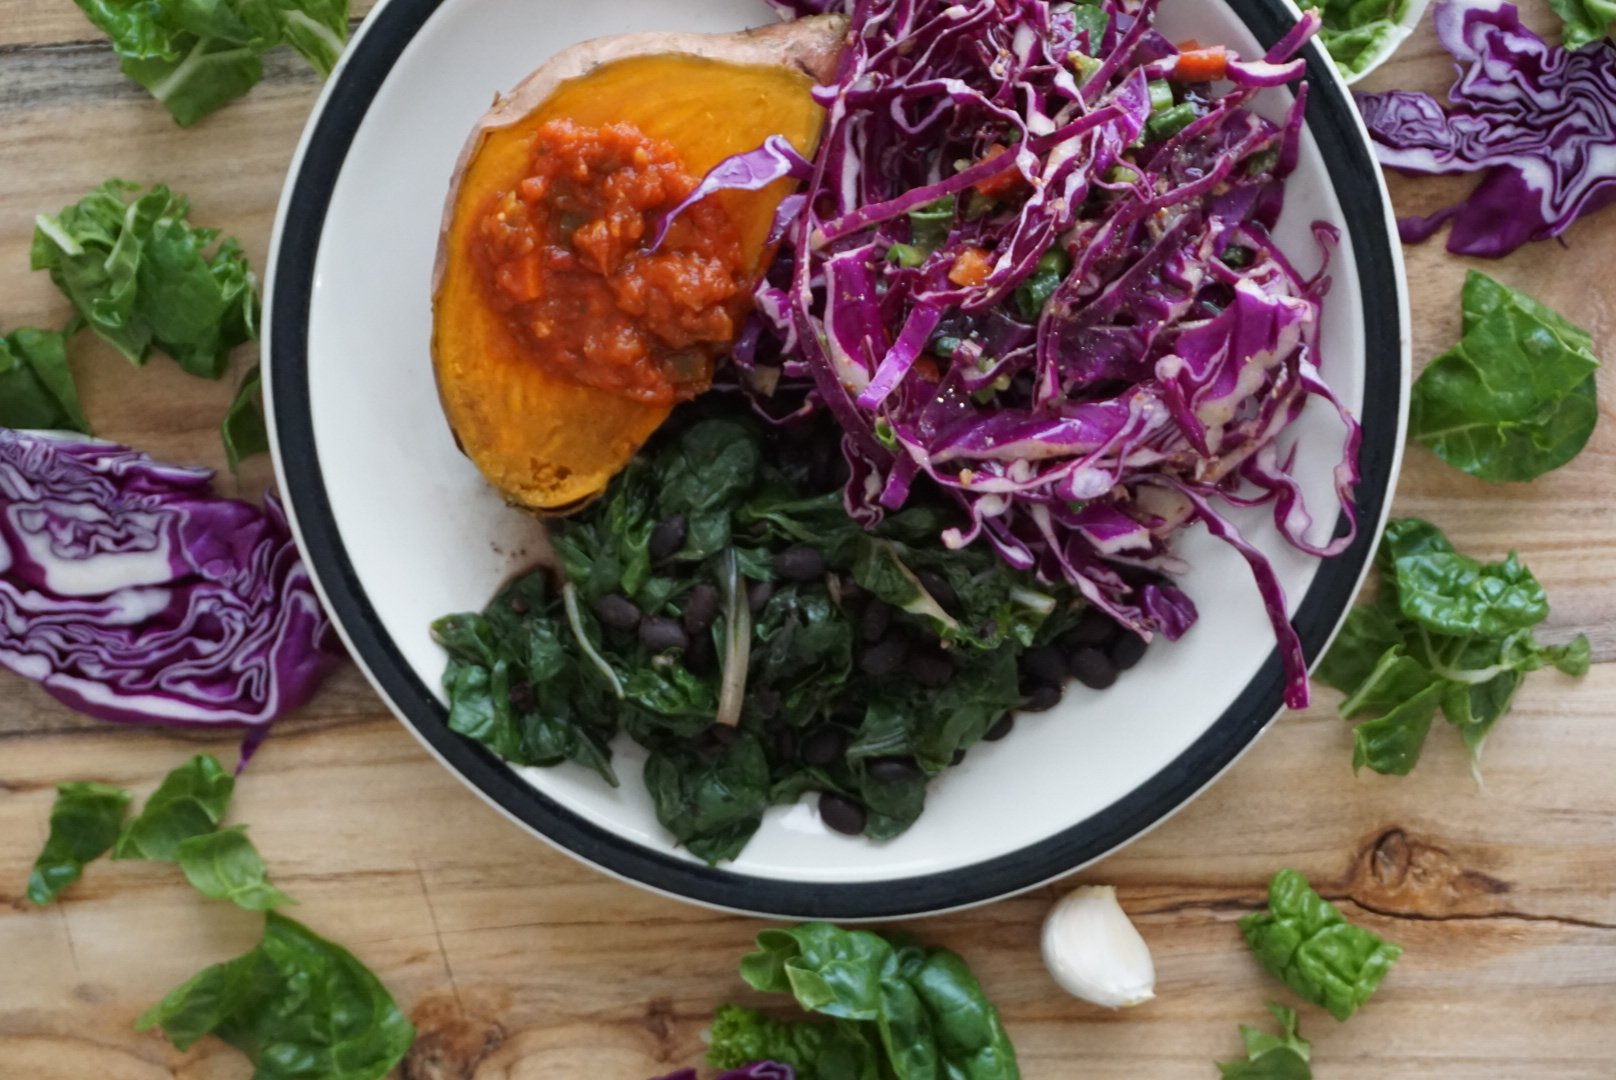 spicy black beans with collards slaw and sweet potatoes